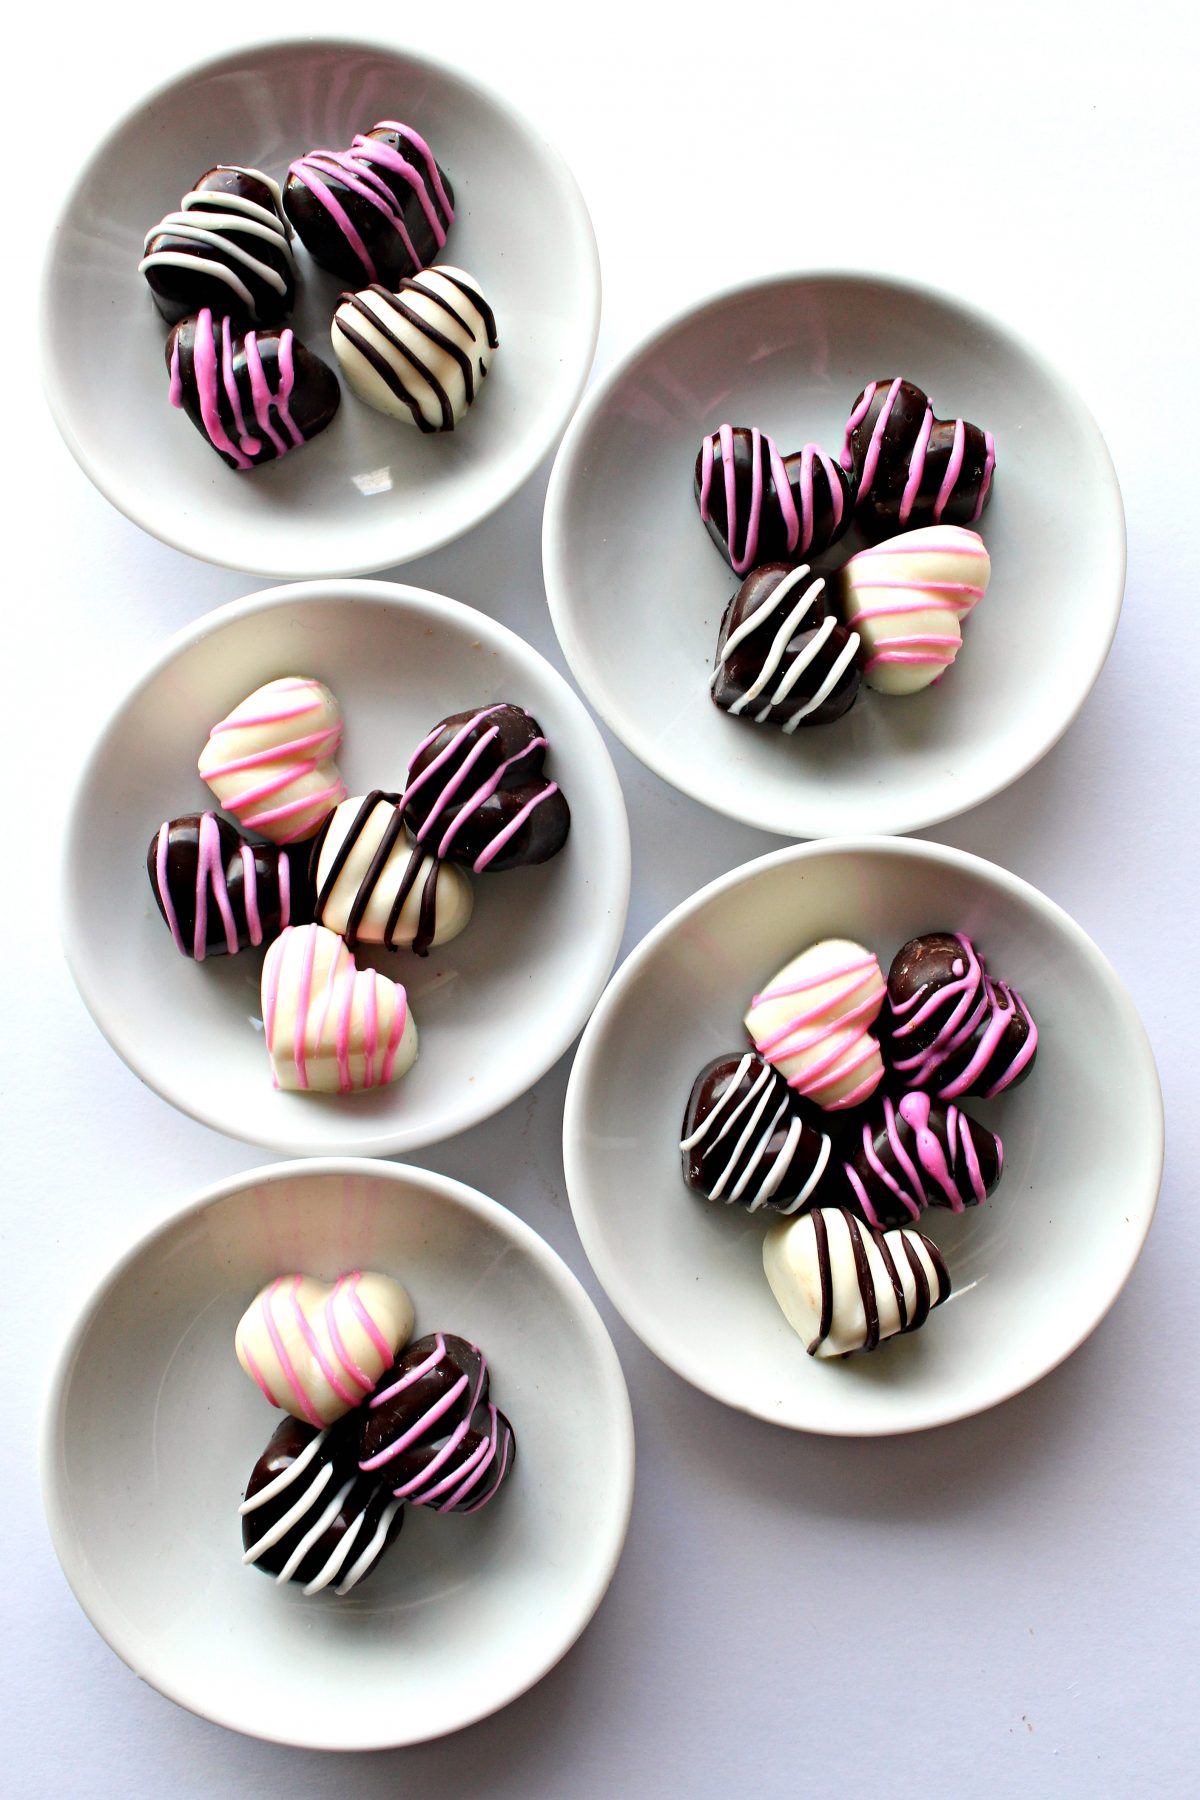 Five small white plates with a few hearts in white and dark chocolate decorated with stripes.